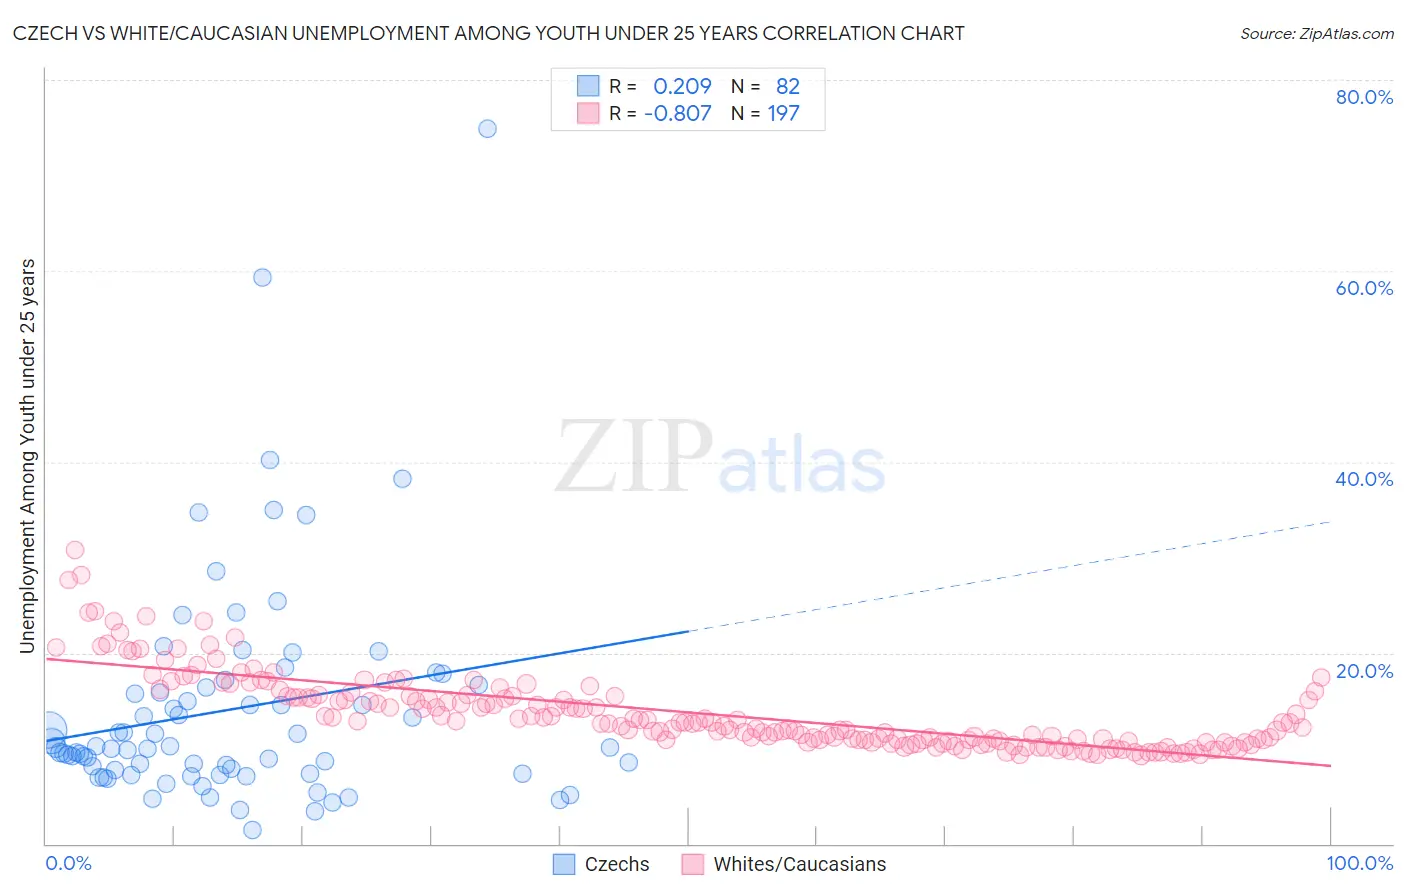 Czech vs White/Caucasian Unemployment Among Youth under 25 years